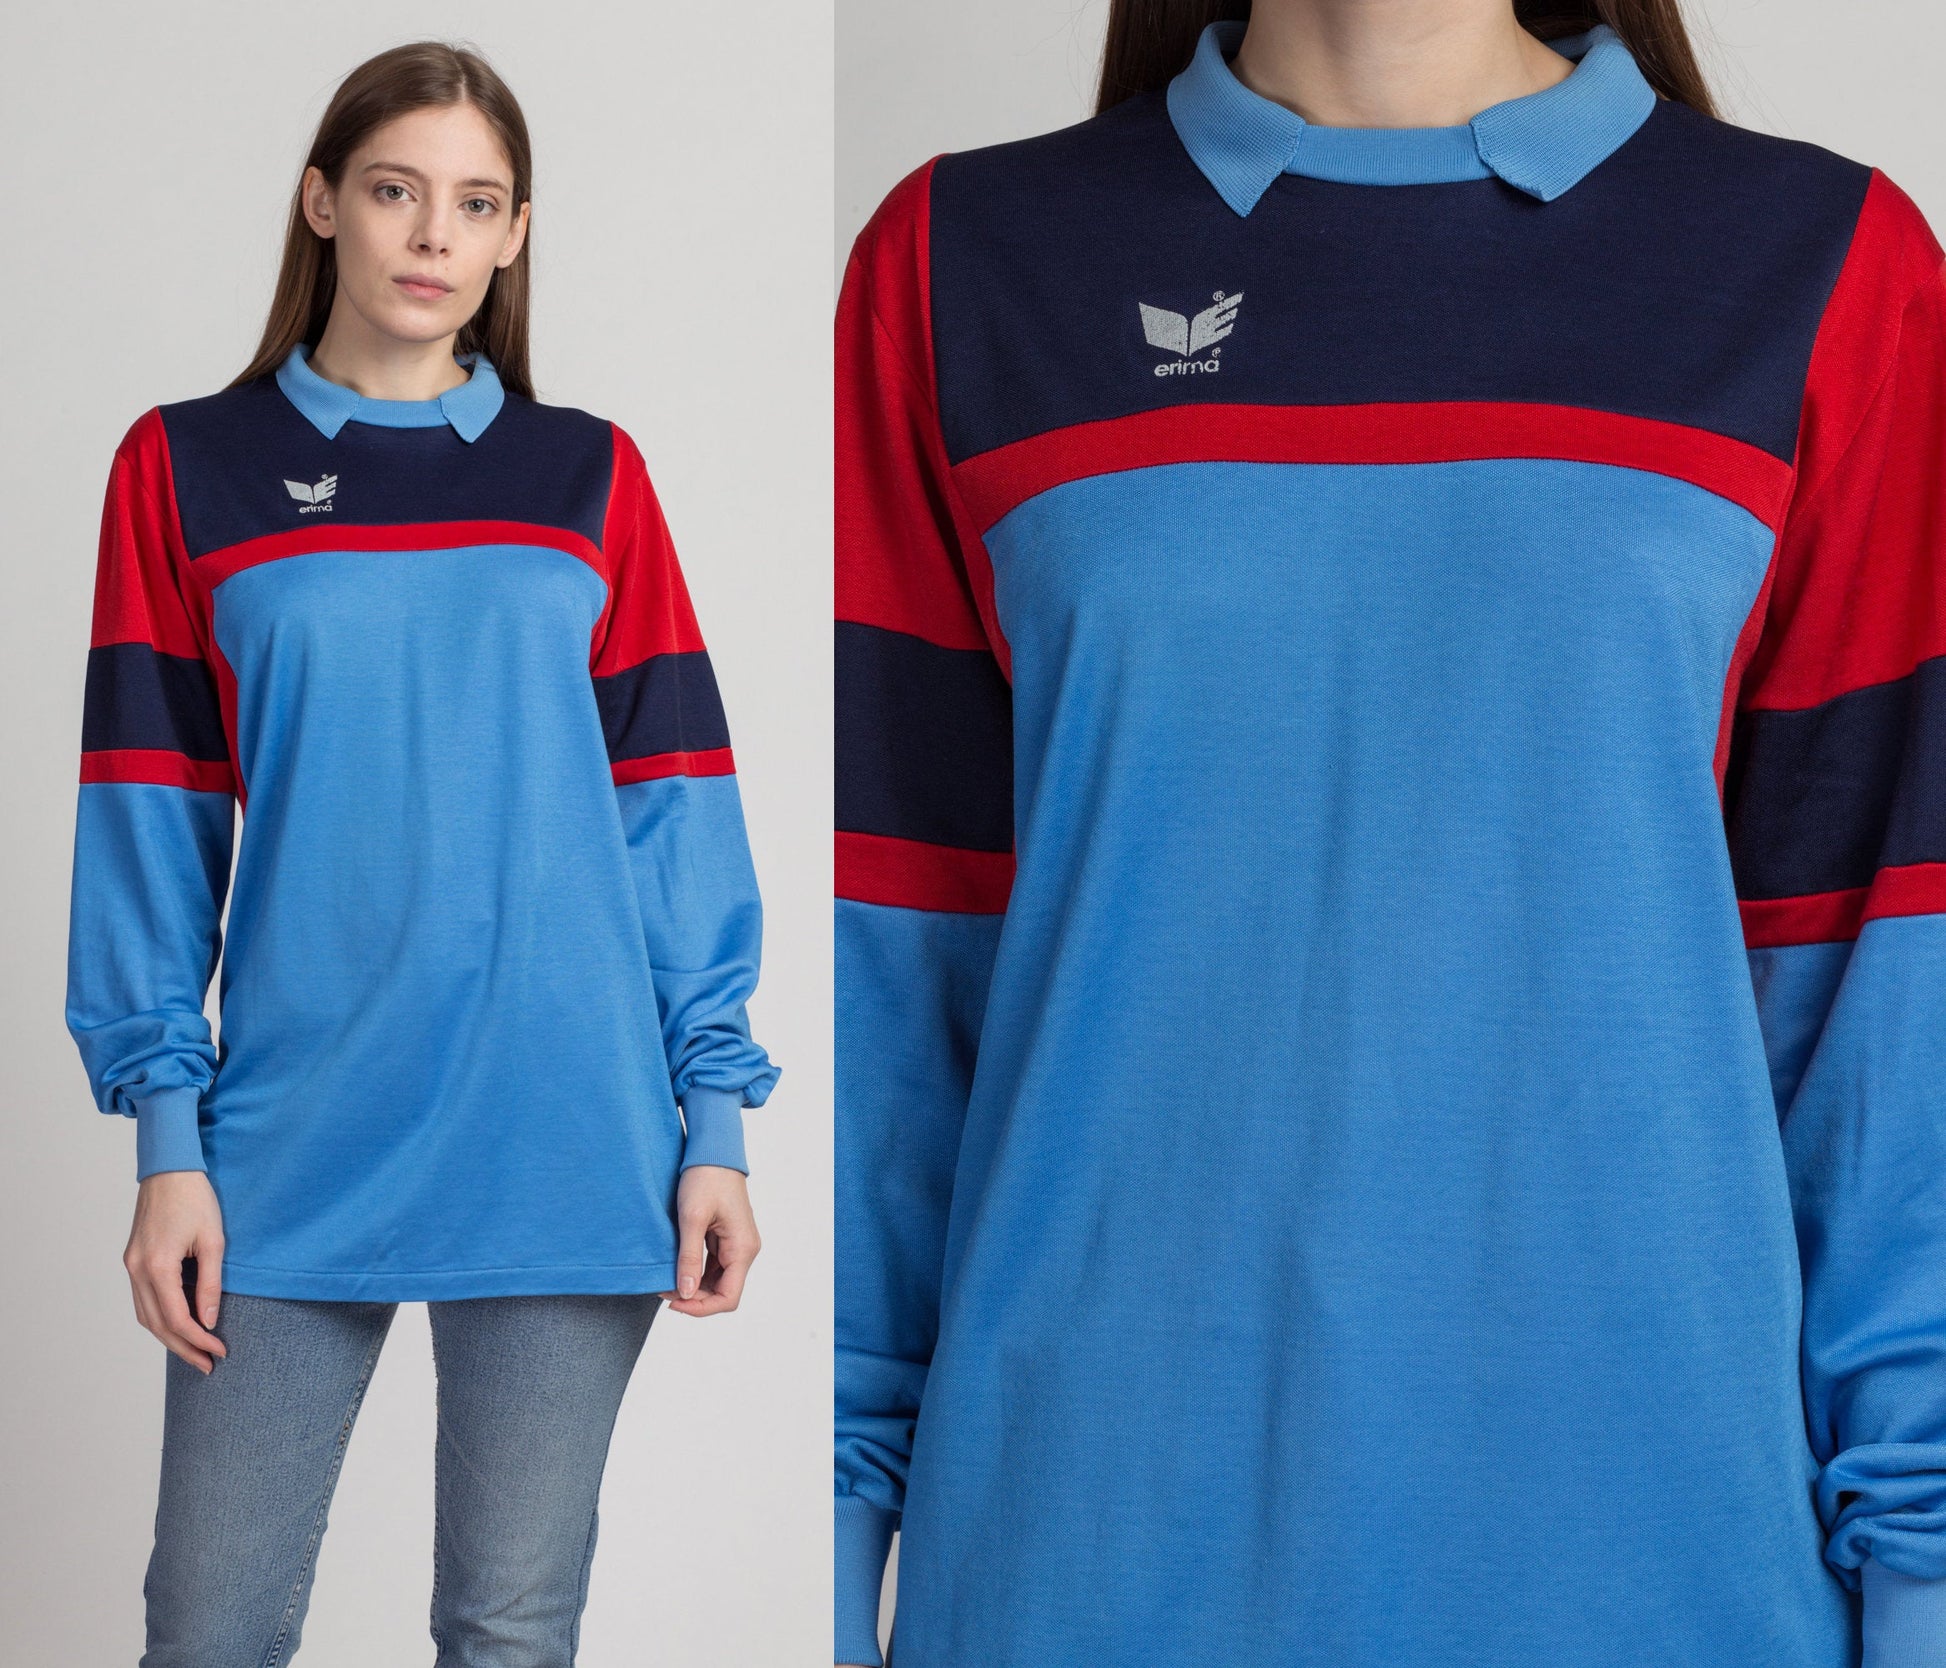 Adidas Vintage Soccer Jersey 1970s White Top With Blue 